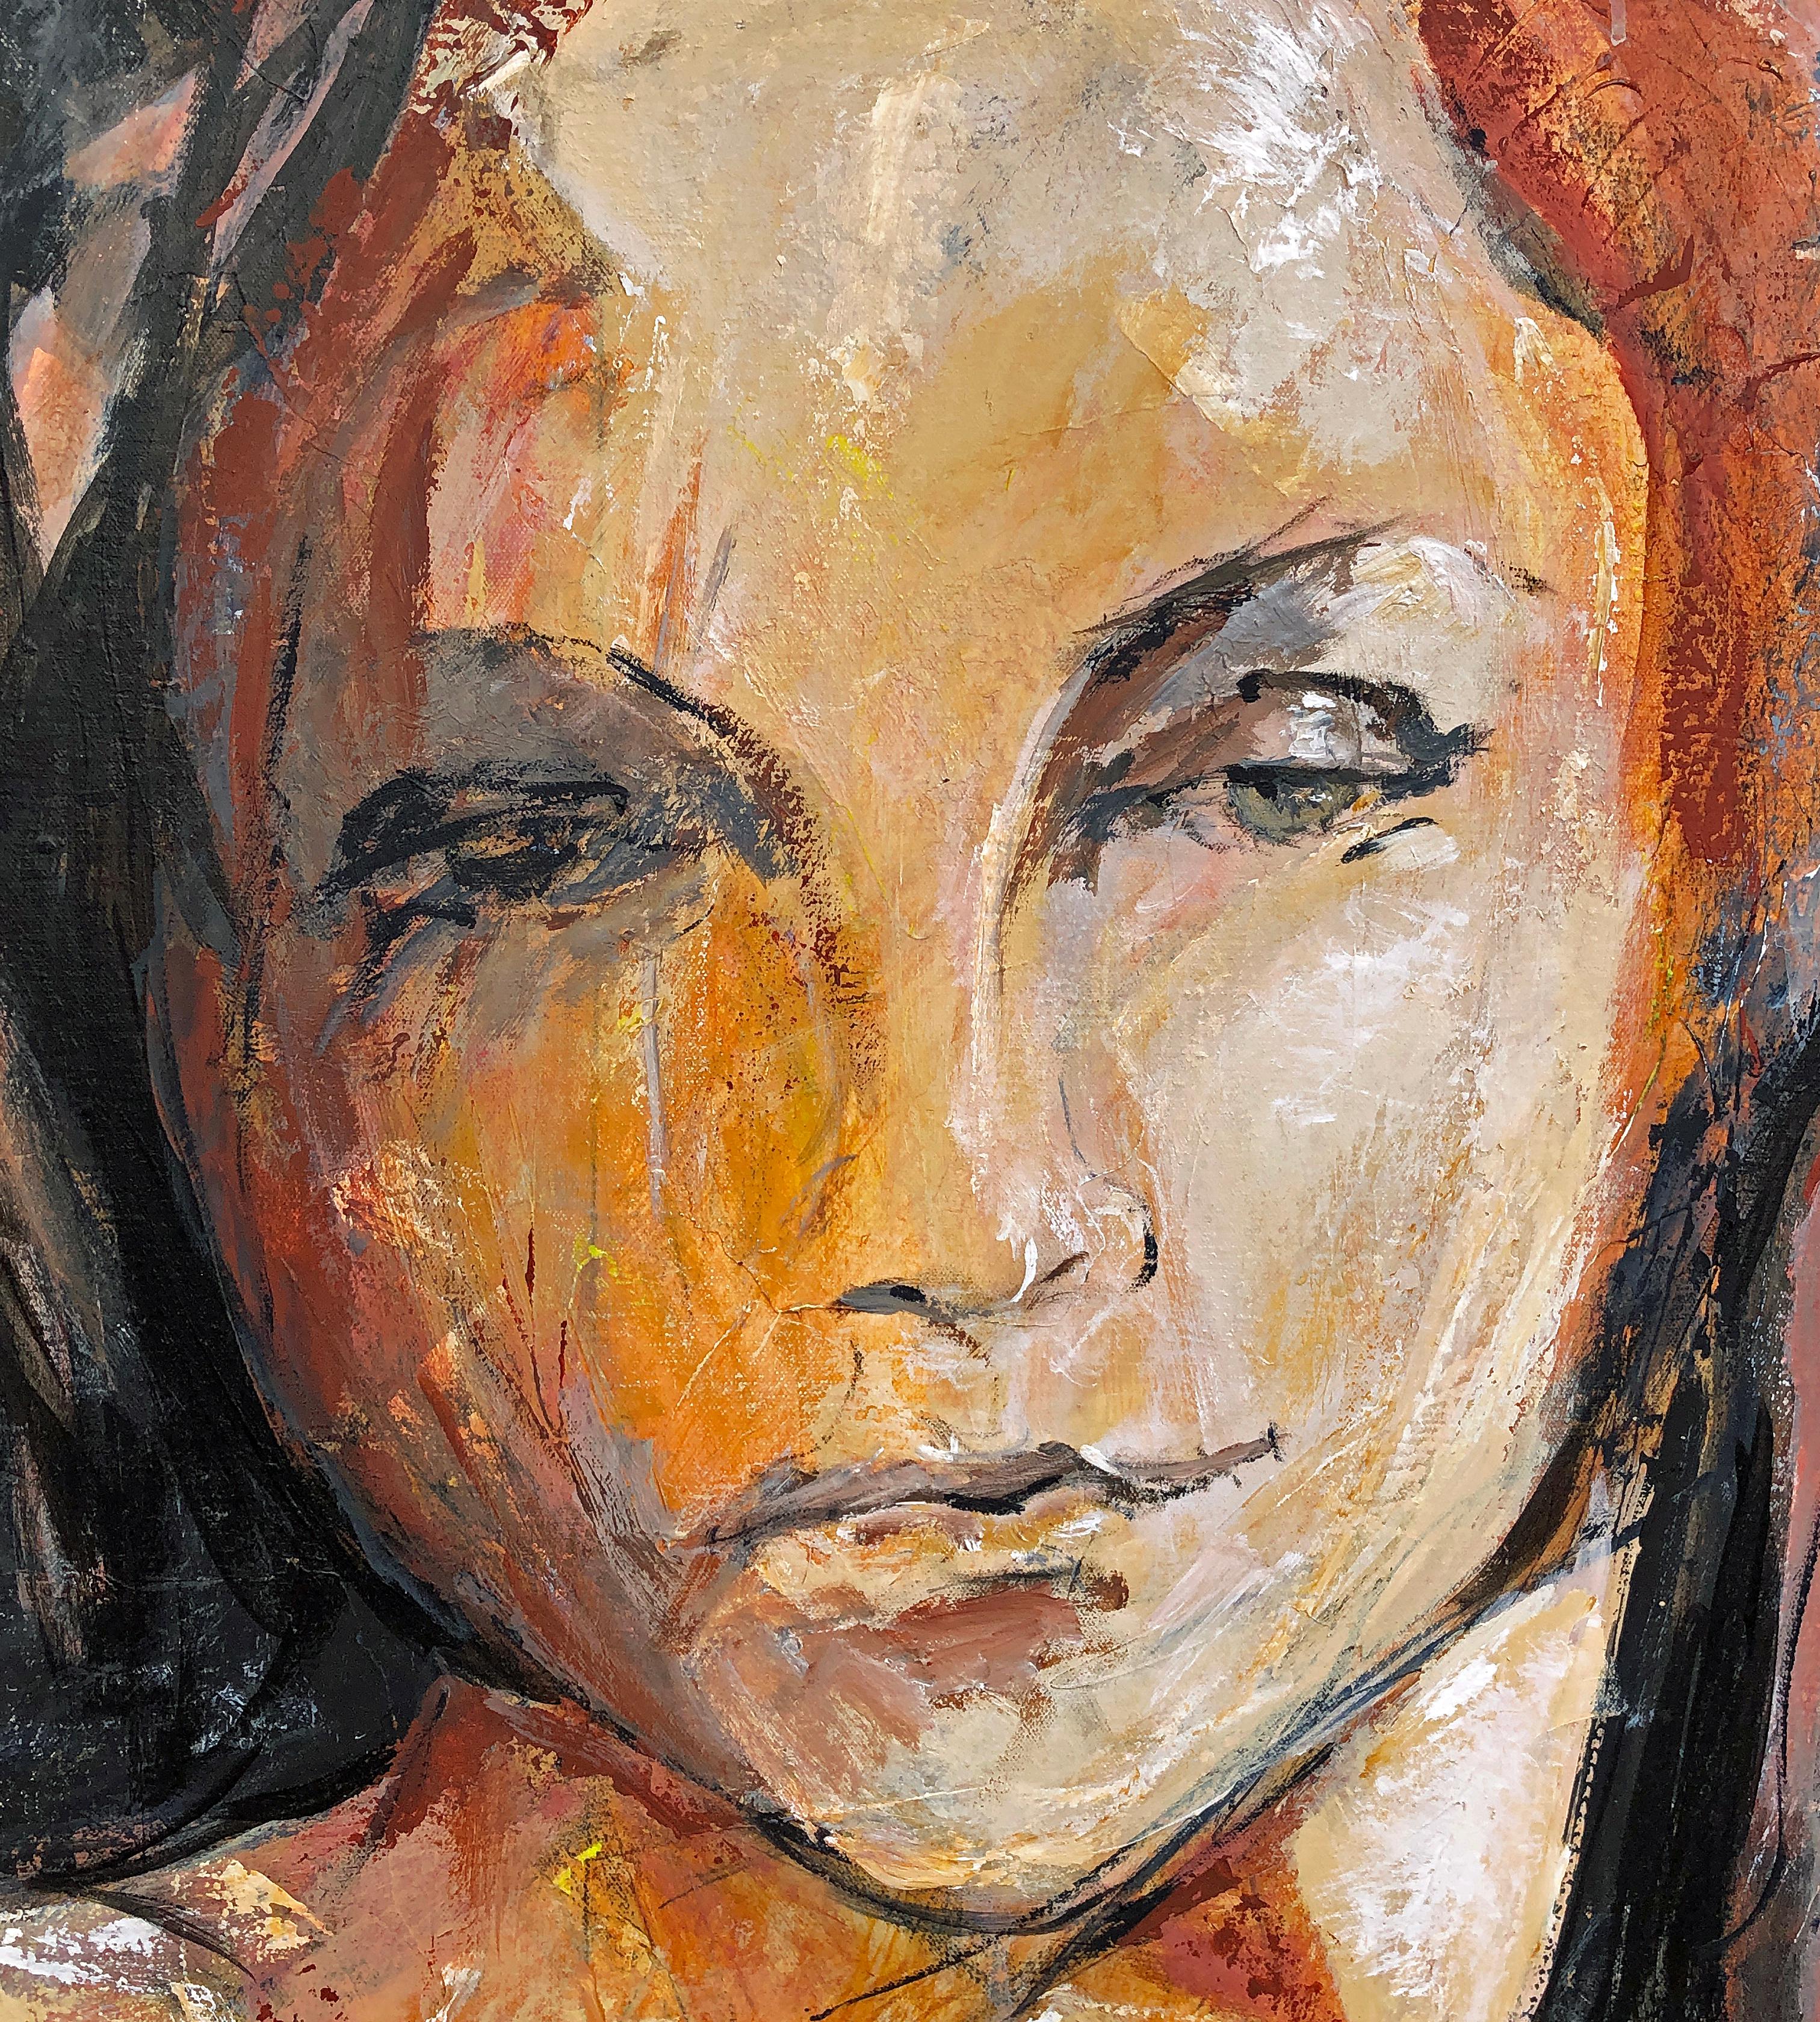 <p>Artist Comments<br />An expressionist portrait rendered in warm red, rust, and ochre with hints of gray and blue peeking through the layers of paint. Punctuated with strong black outlines. Artist Sharon Sieben captures her model whom she